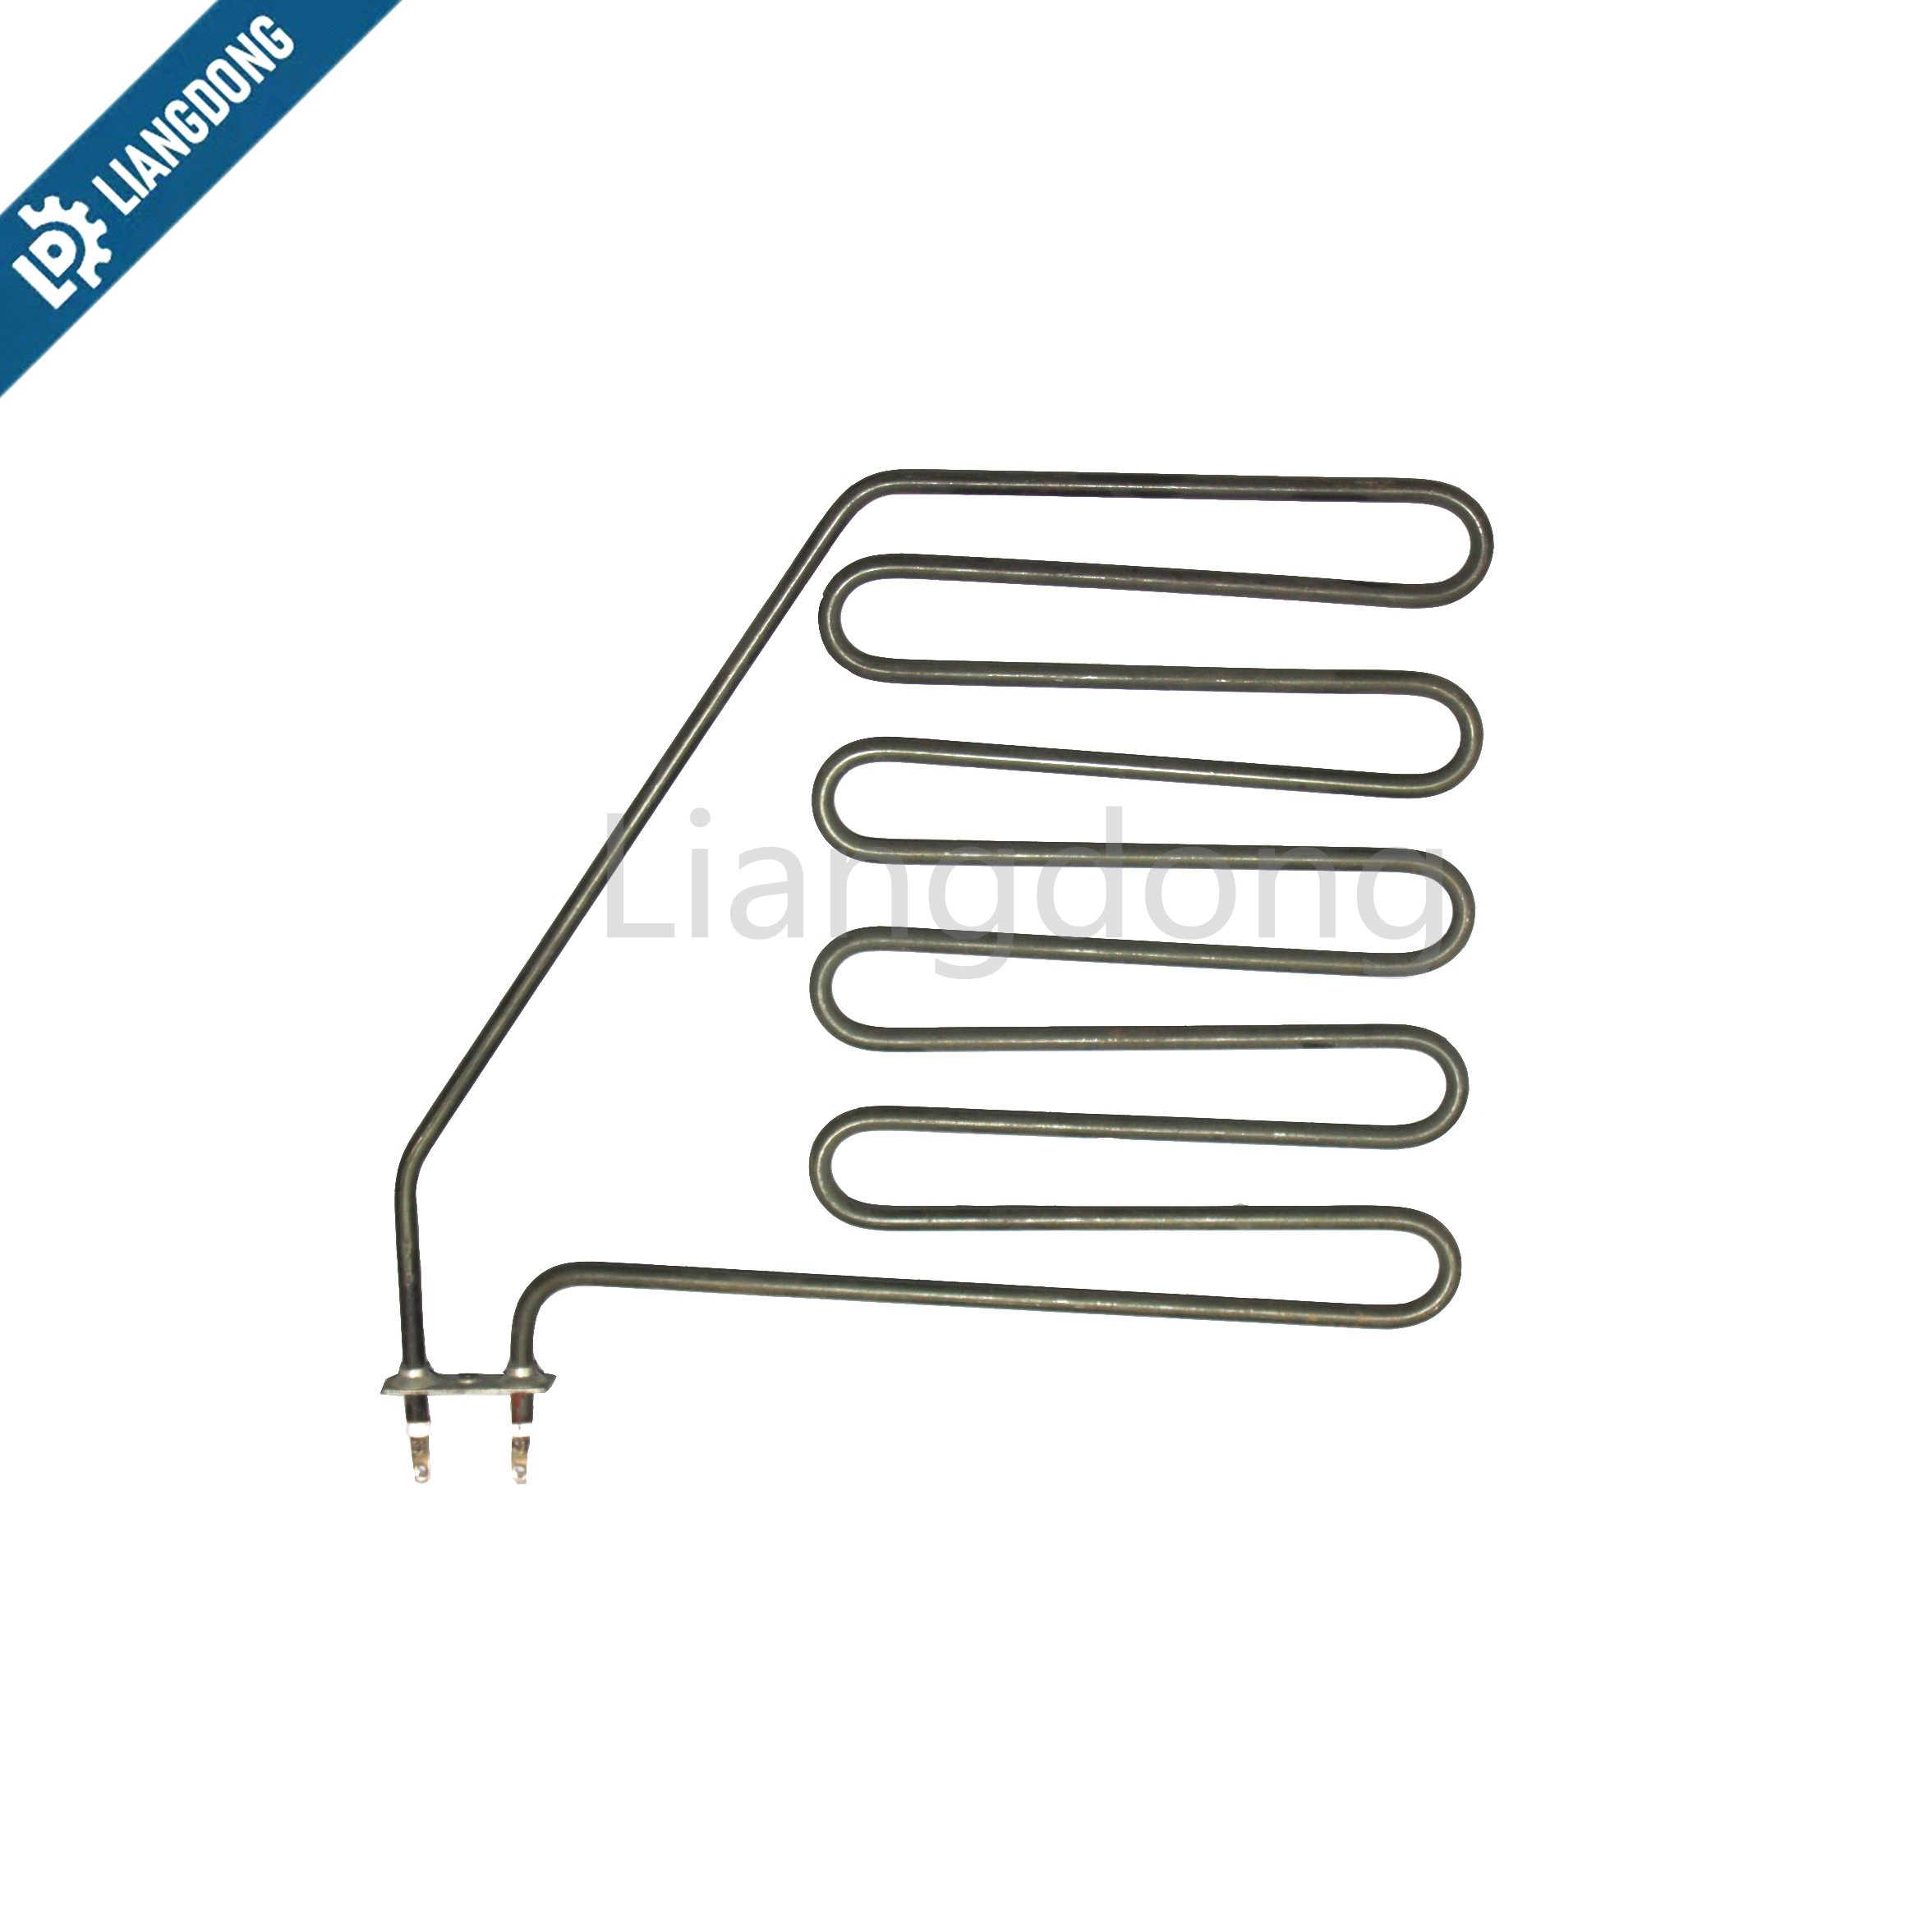 Stainless steel customized tubular oven heating element